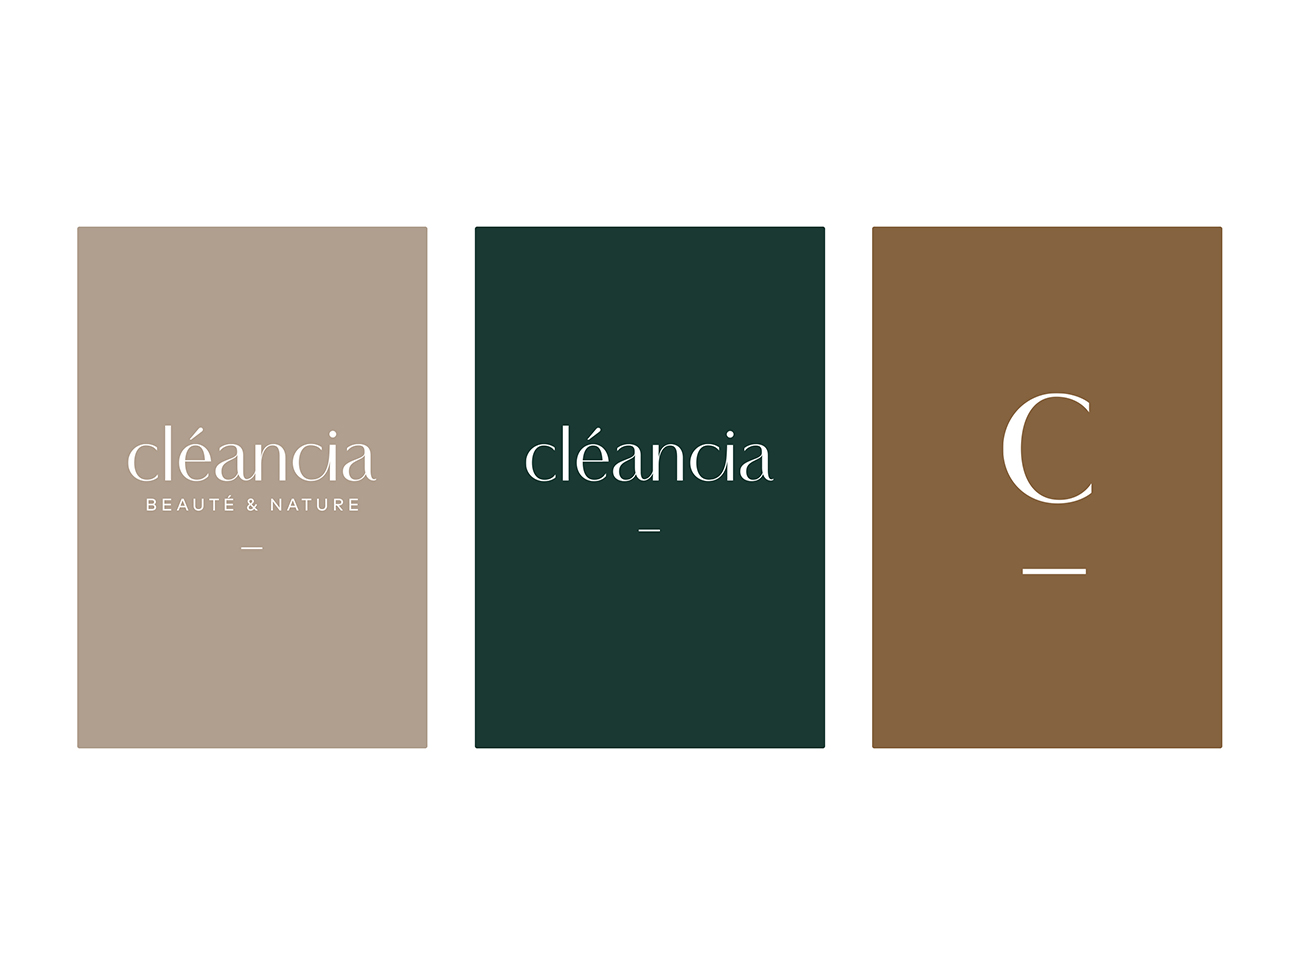 cleancia_branding_by-catherine-bisaillon_1300x975_003